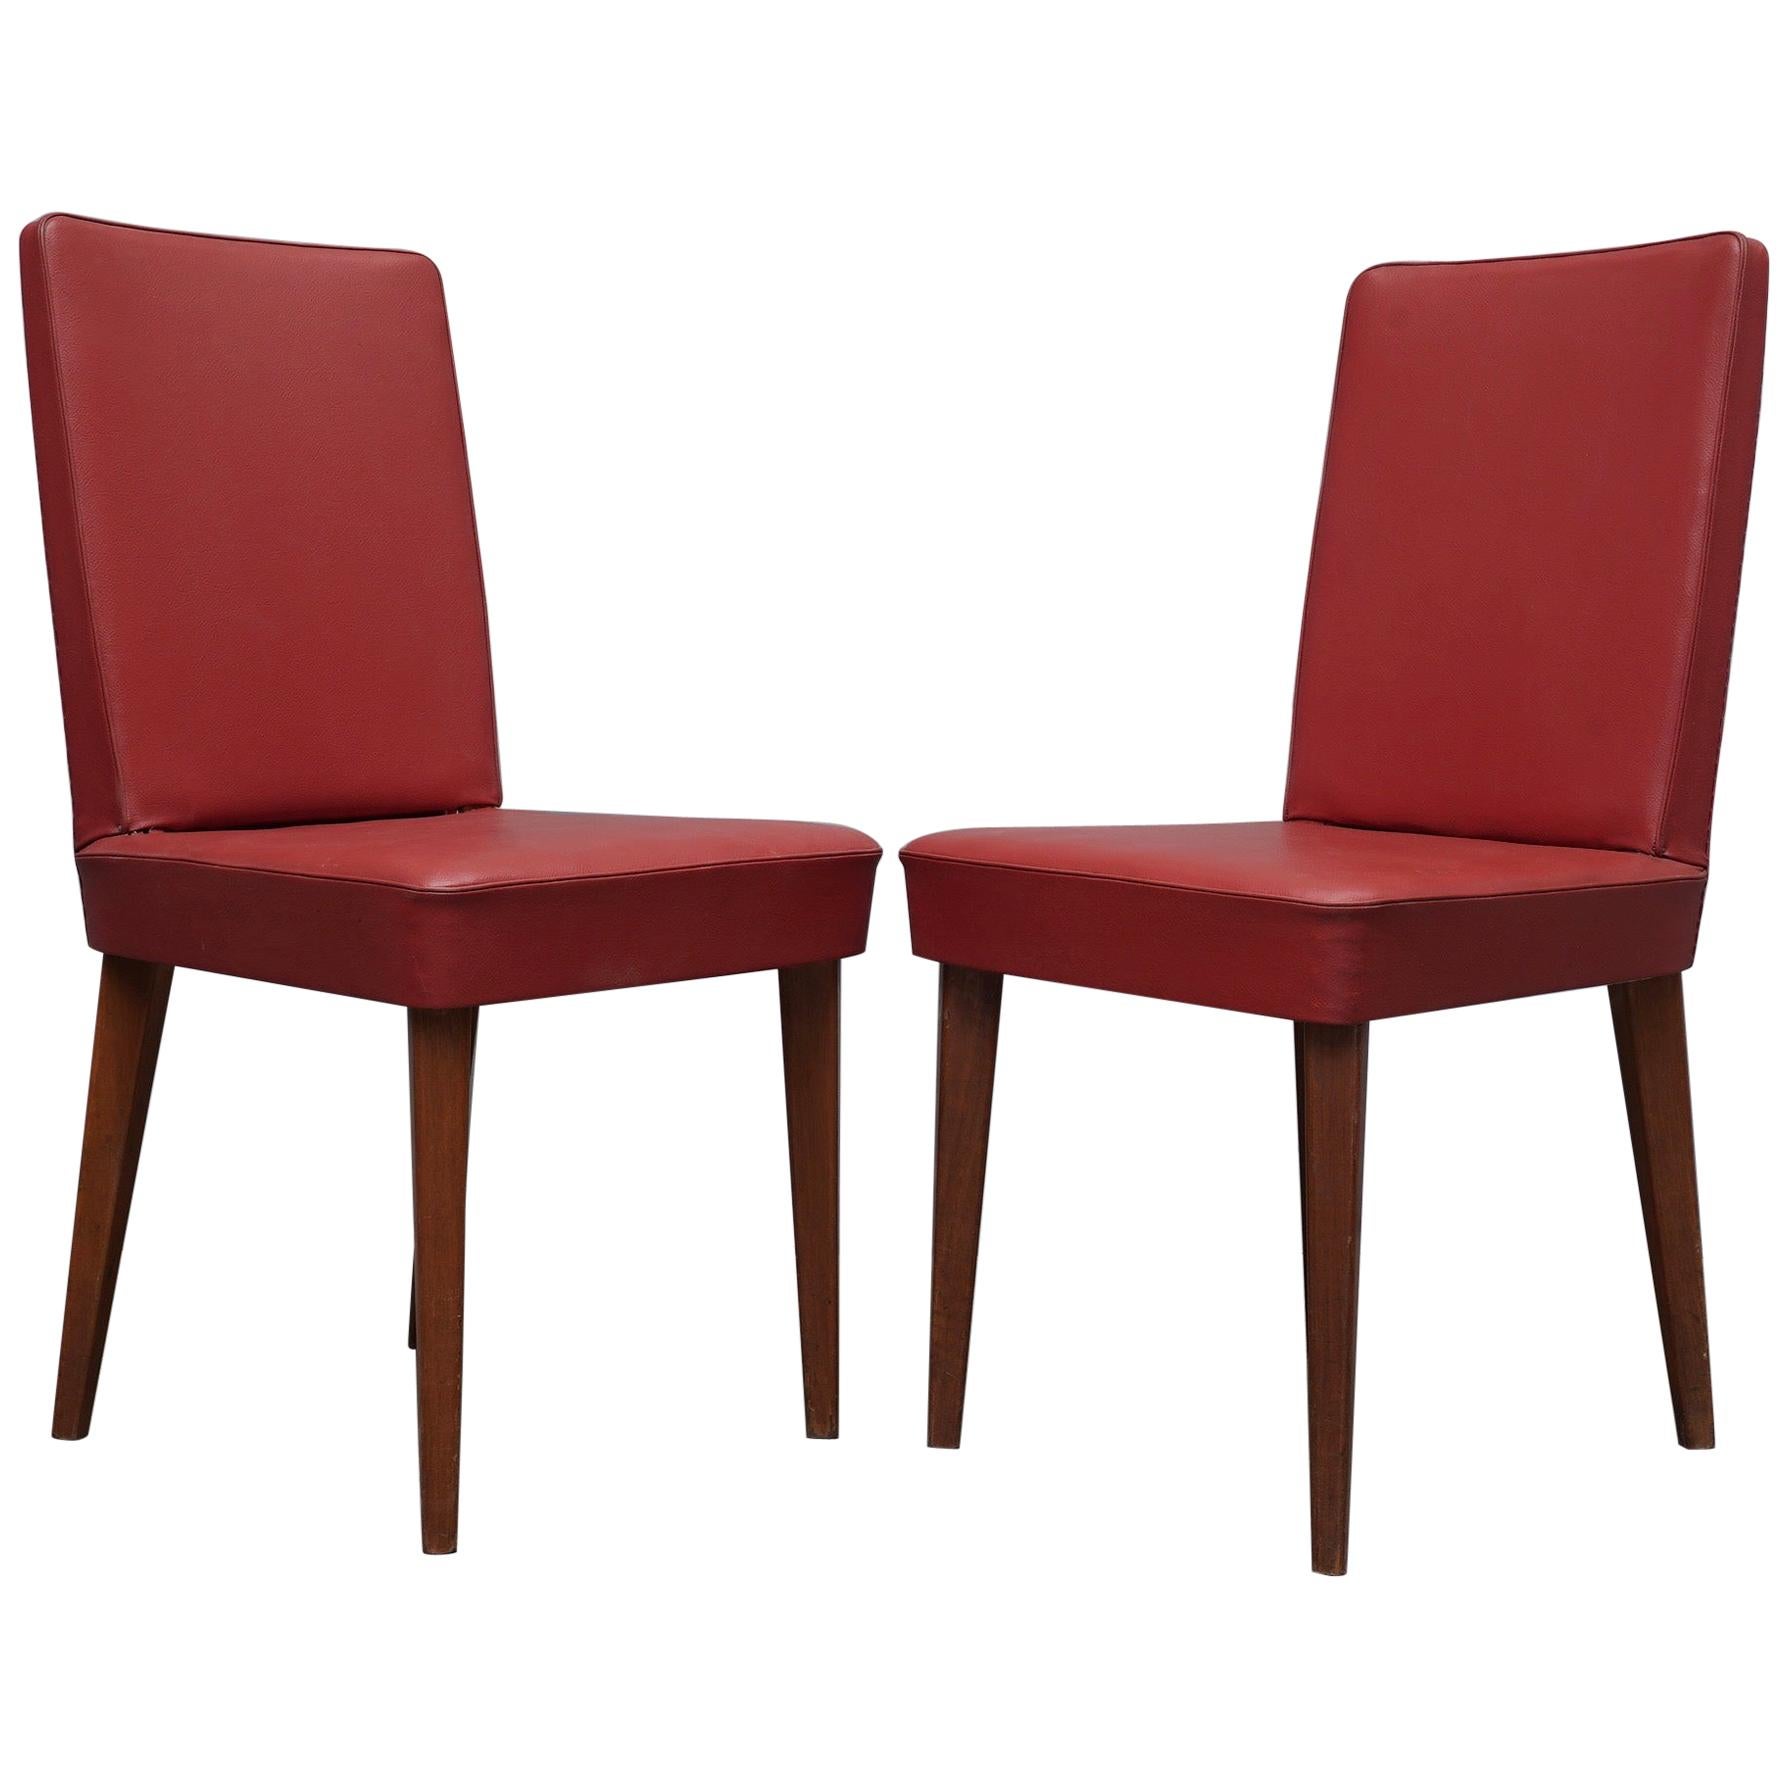 Pair of Anonima Castelli Bologna Red Leather Italian Midcentury Chair, 1960 For Sale